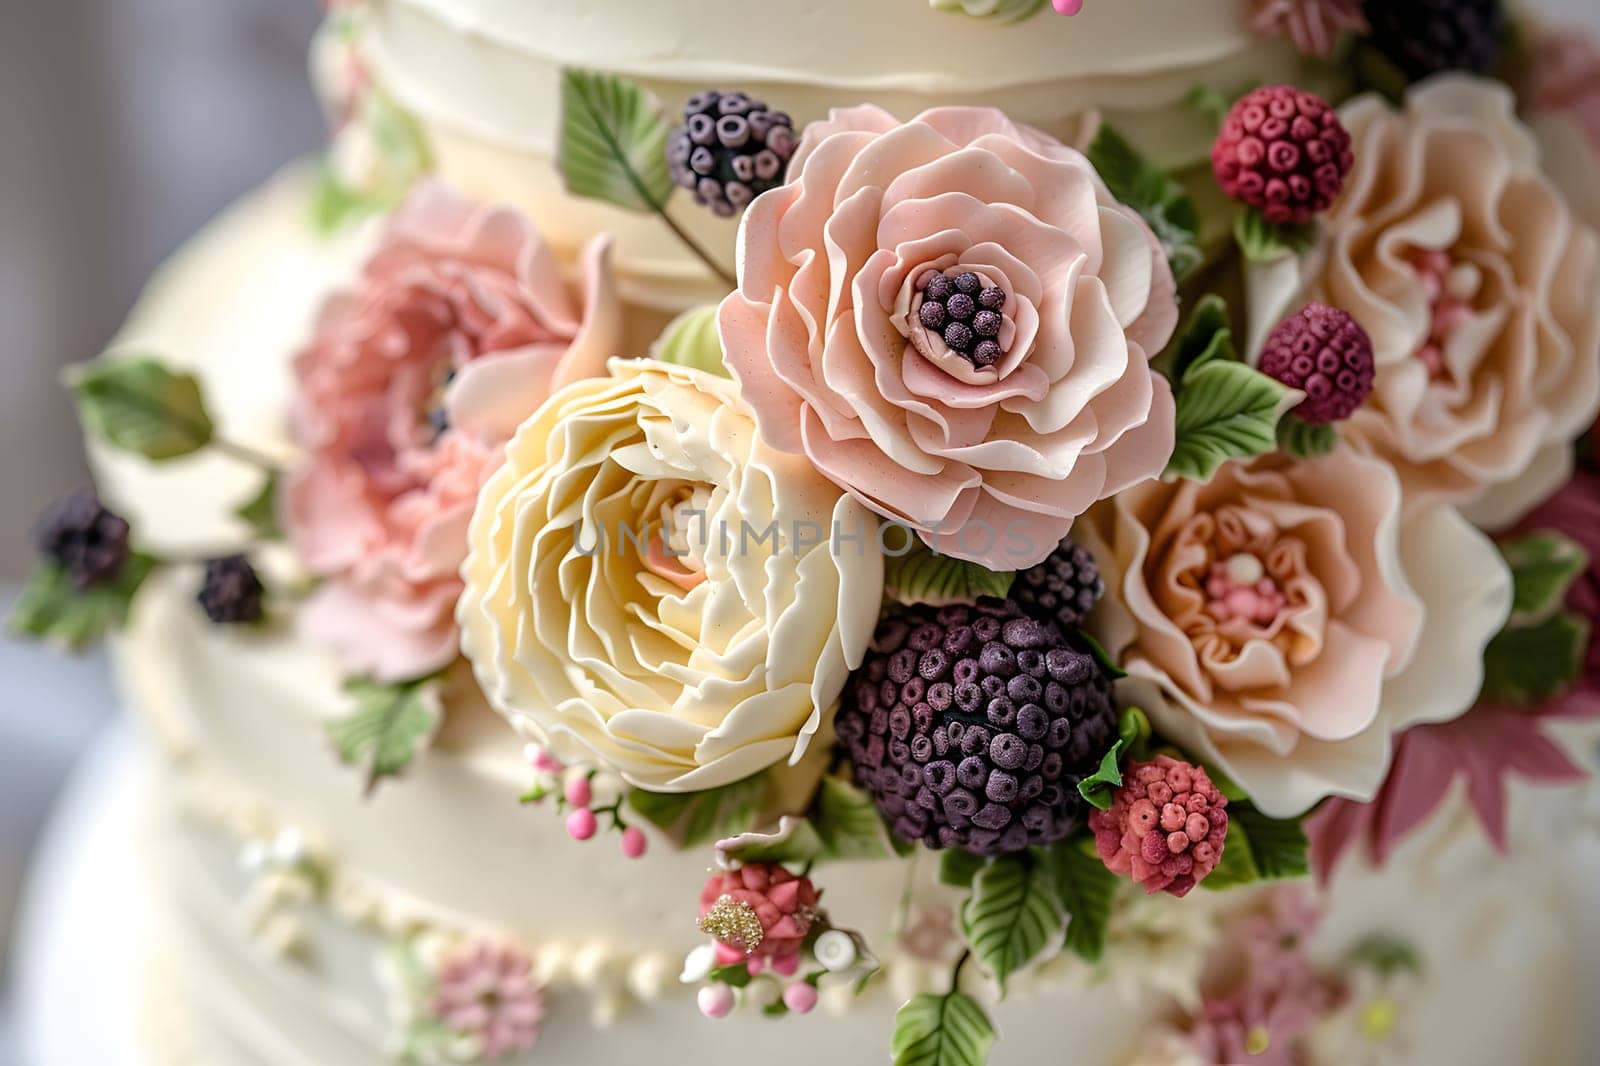 A close up of a wedding cake adorned with floral decorations and berries by Nadtochiy